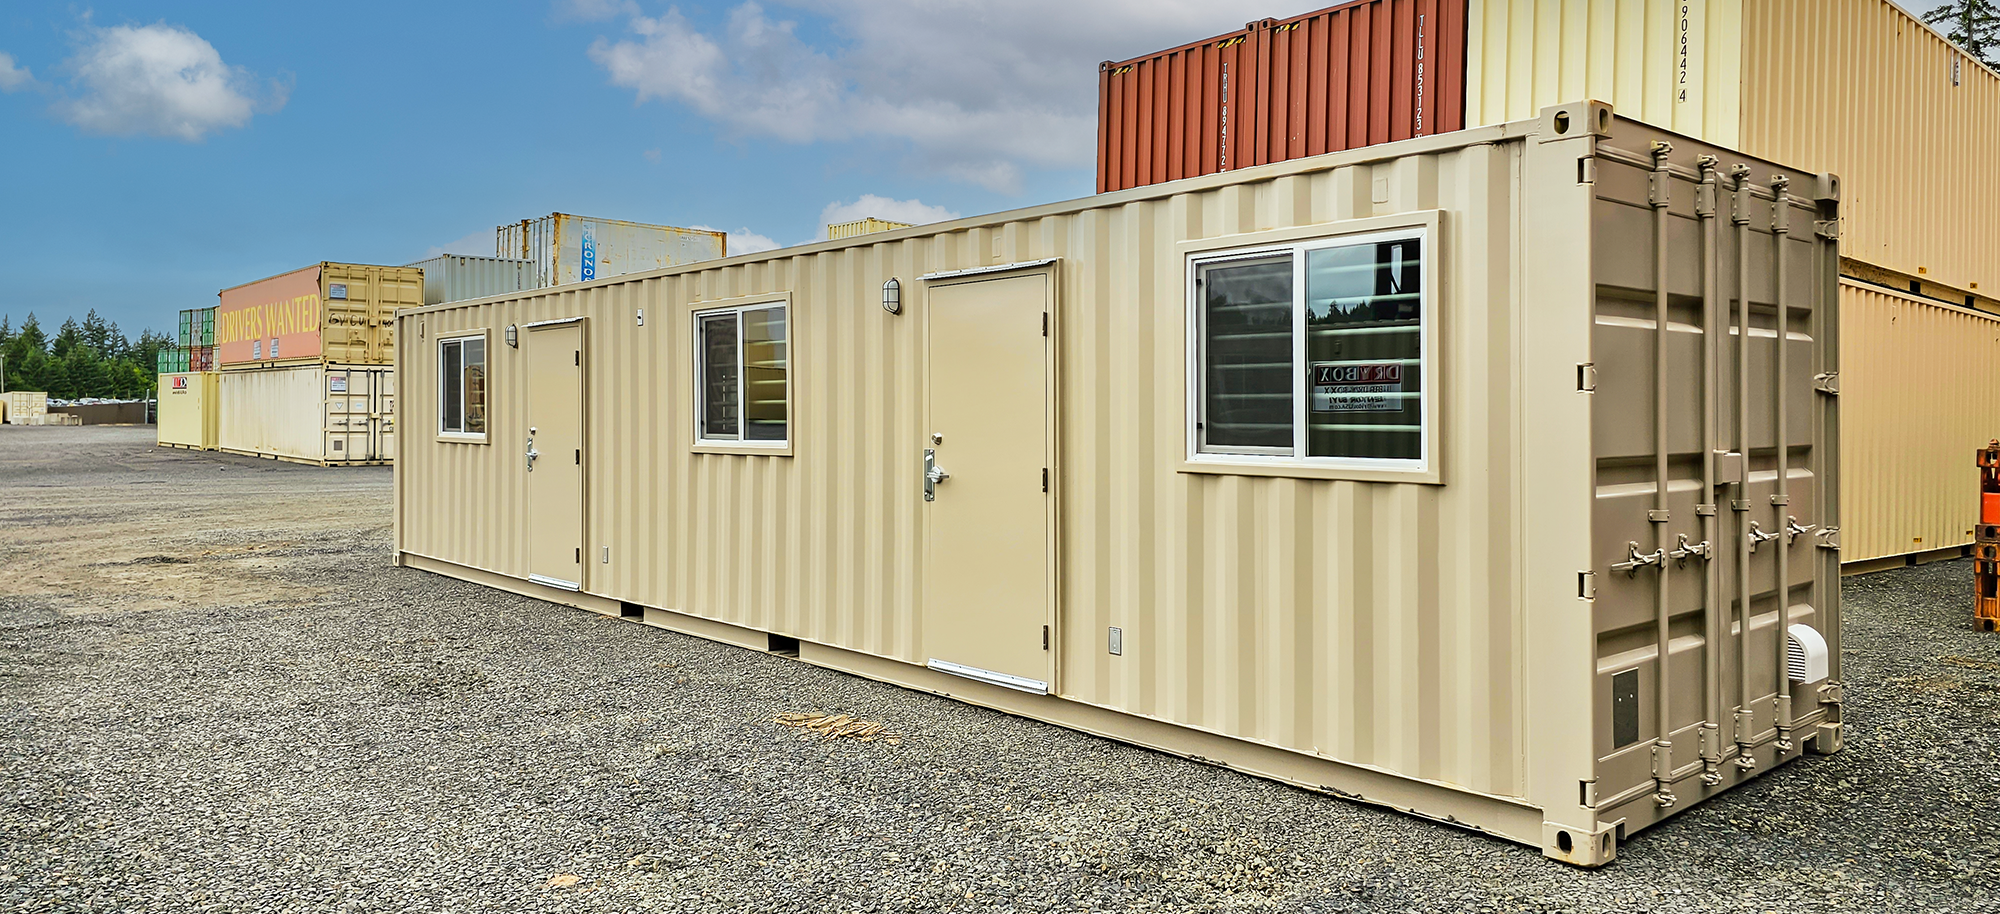 A forty-foot ground level office container